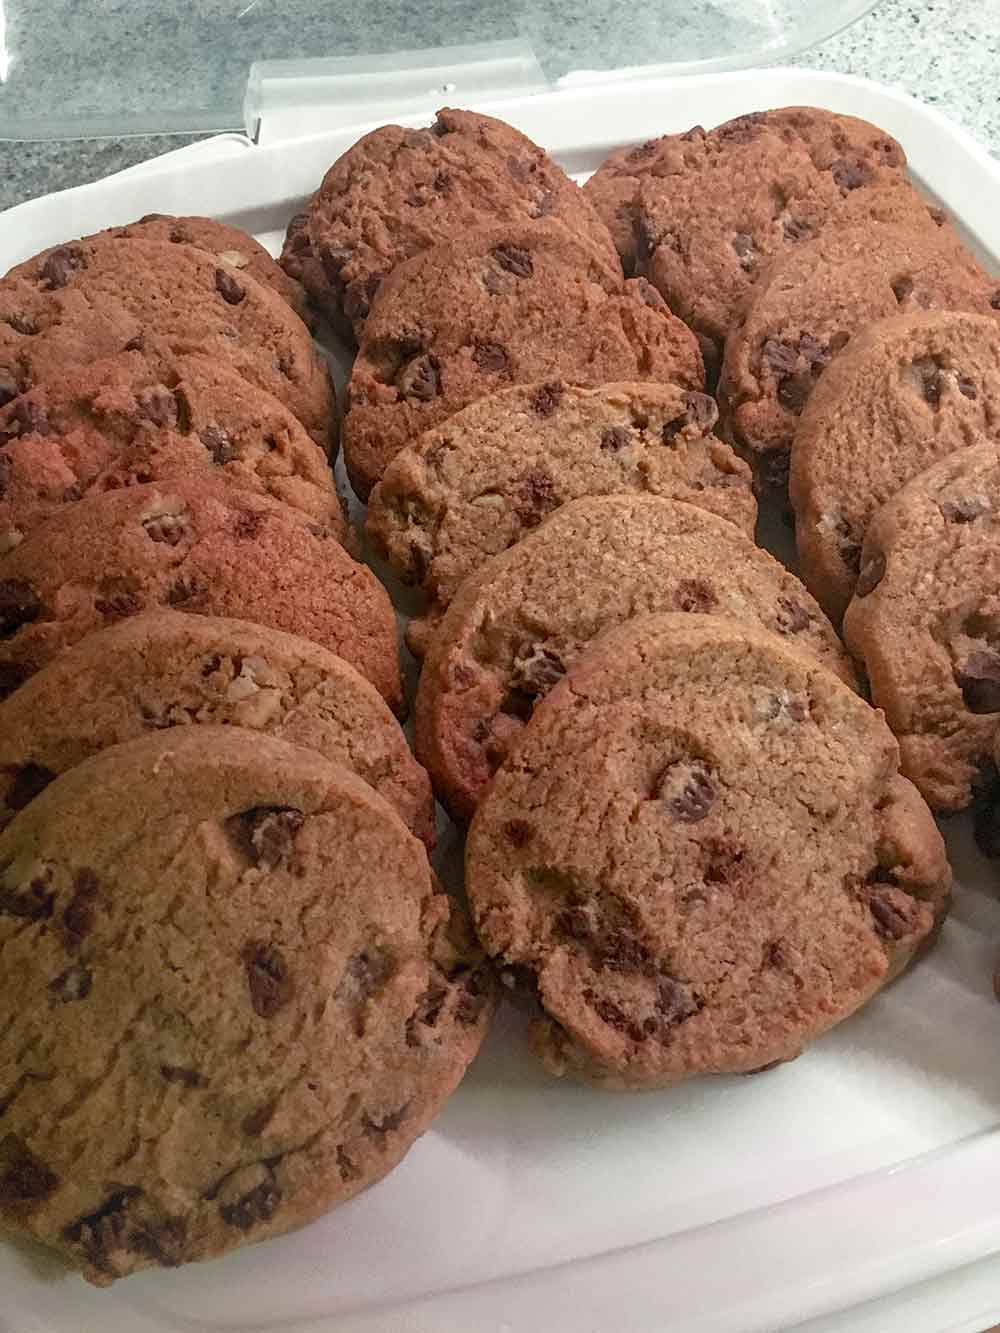 A tray of whole wheat chocolate chip cookies